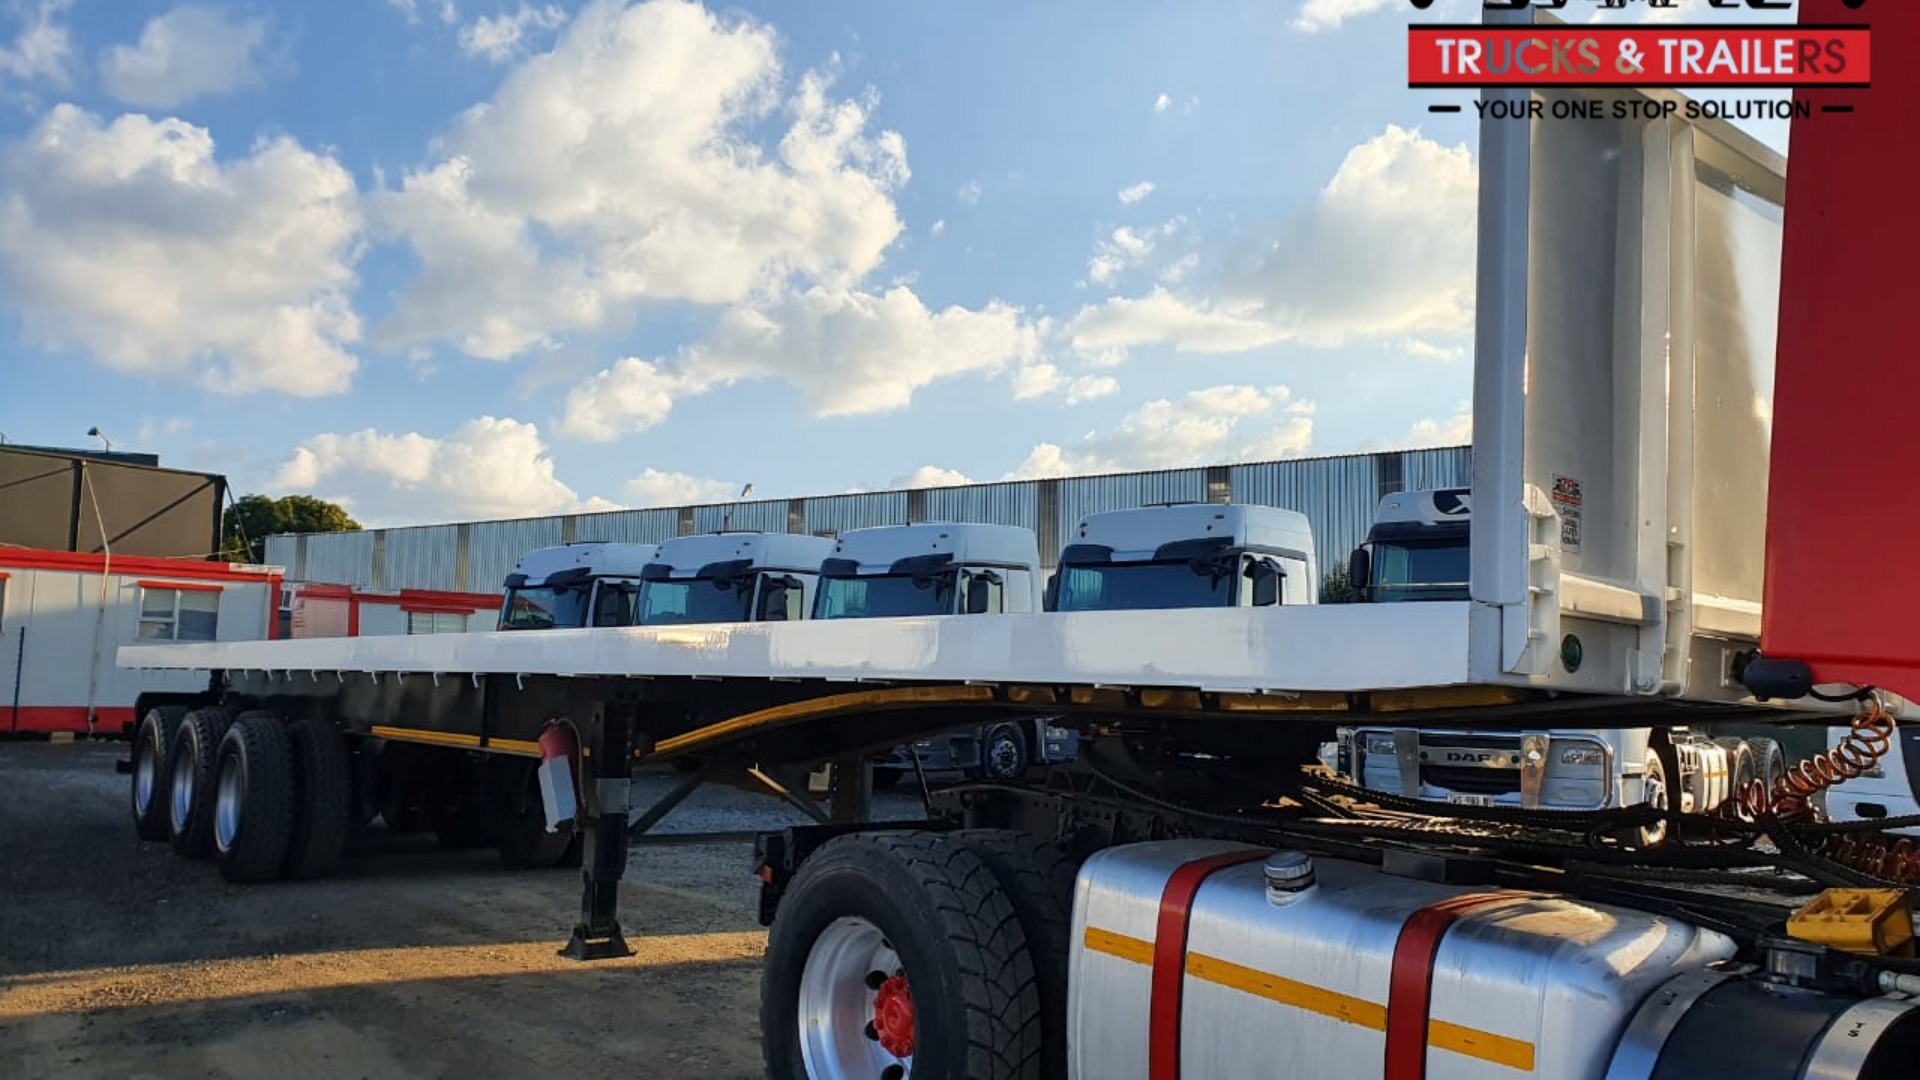 SA Truck Bodies Trailers Flat deck SA TRUCK BODIES TRI AXLE FLAT DECK 2020 for sale by ZA Trucks and Trailers Sales | Truck & Trailer Marketplaces